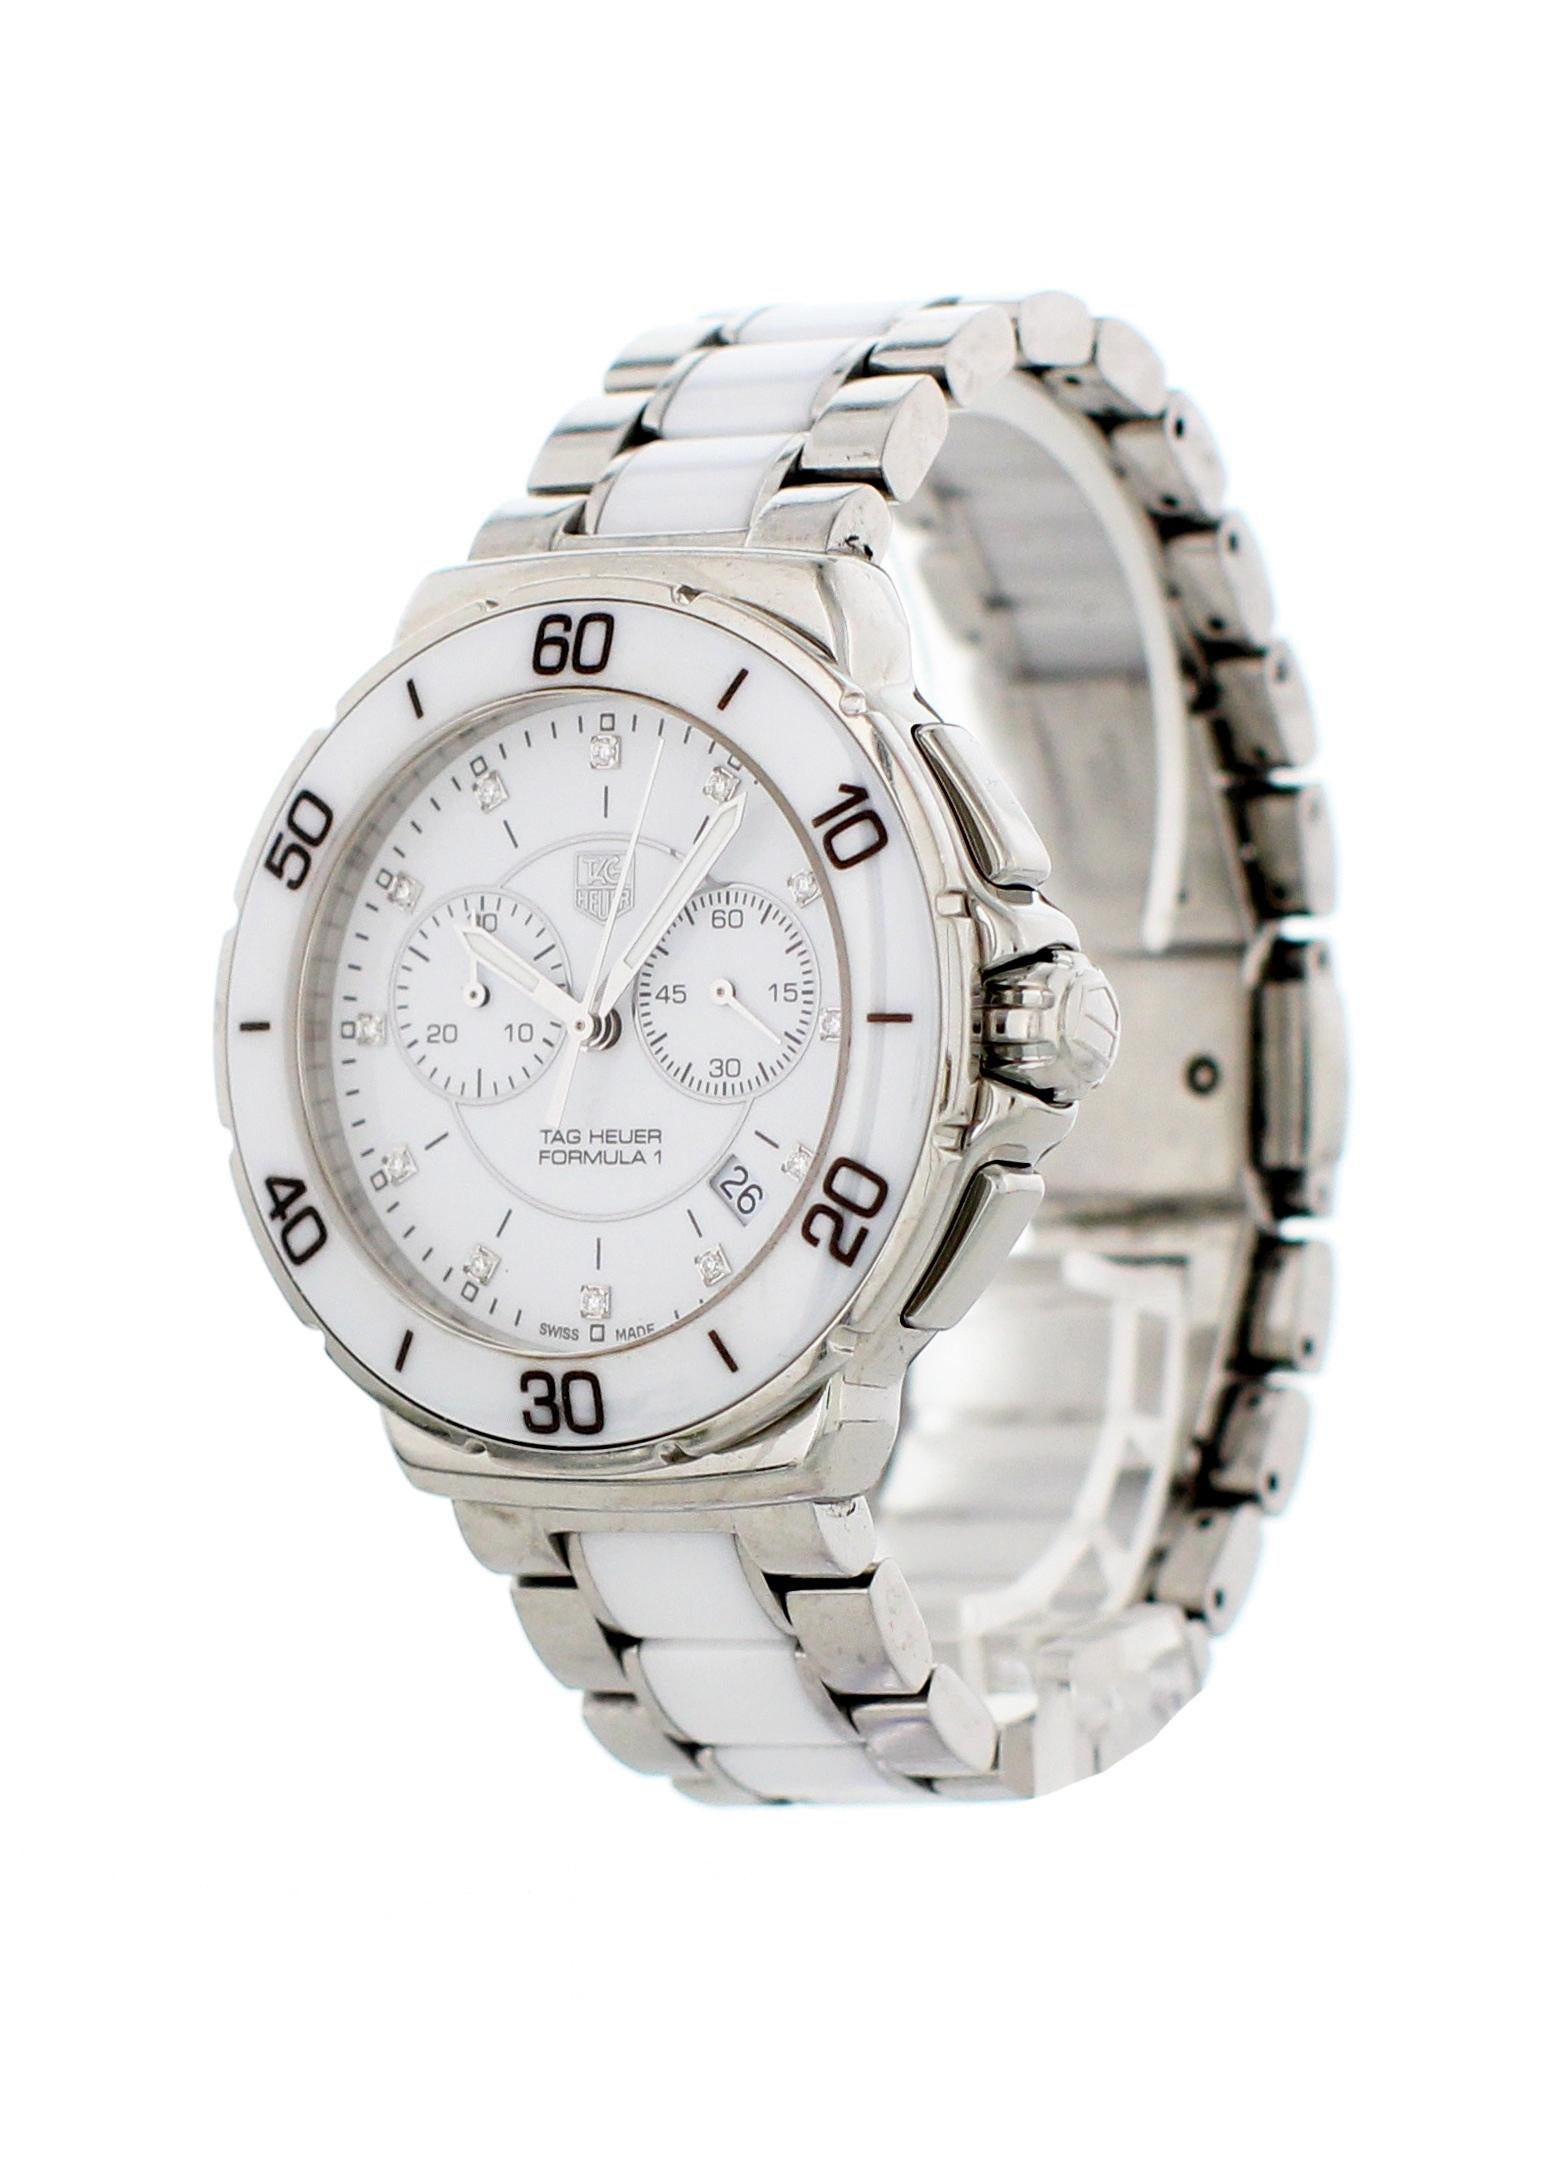 Tag Heuer Formula 1 CAH1211 Ladies Watch. 42mm stainless steel case. Stainless steel uni-directional bezel with white ceramic bezel insert. White ceramic dial with luminous hands and diamond hour markers. Minute markers around the outer rim. Date